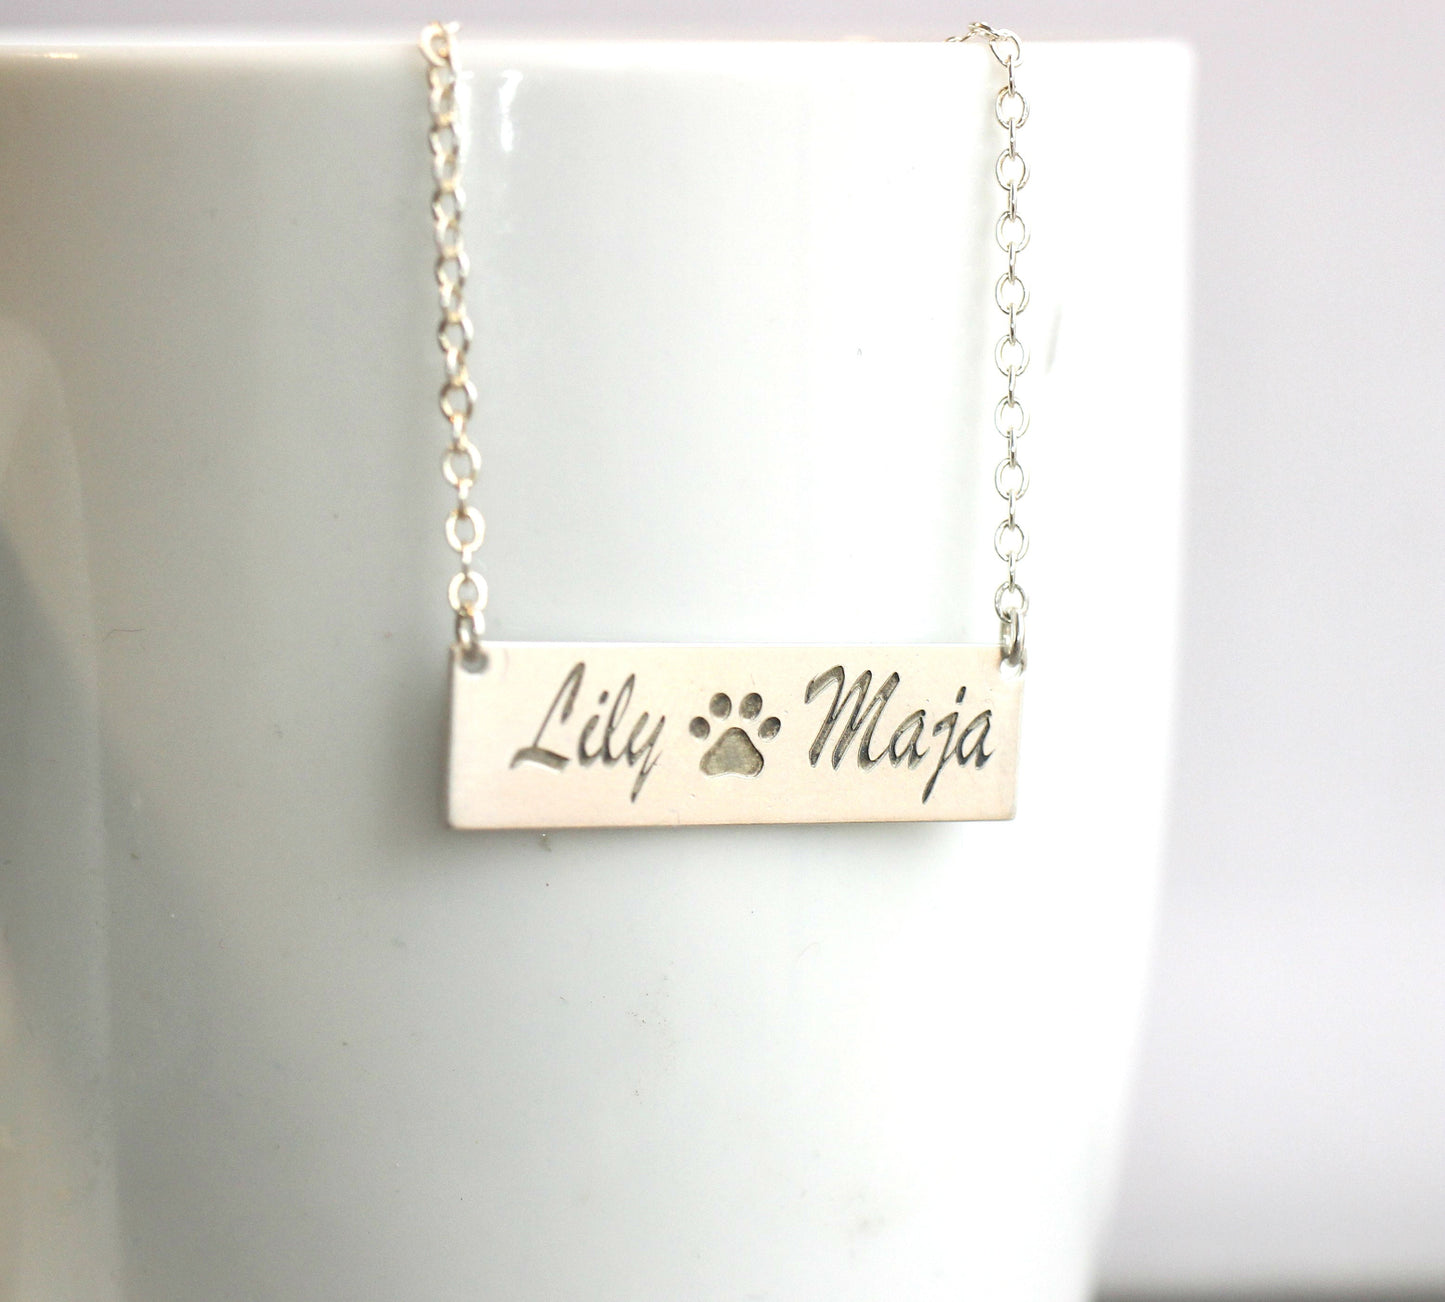 Pawprint Necklace // Sterling Silver Name Necklace // Custom Engraved Bar Jewelry // Pet Memorial Necklace // Gift for Her